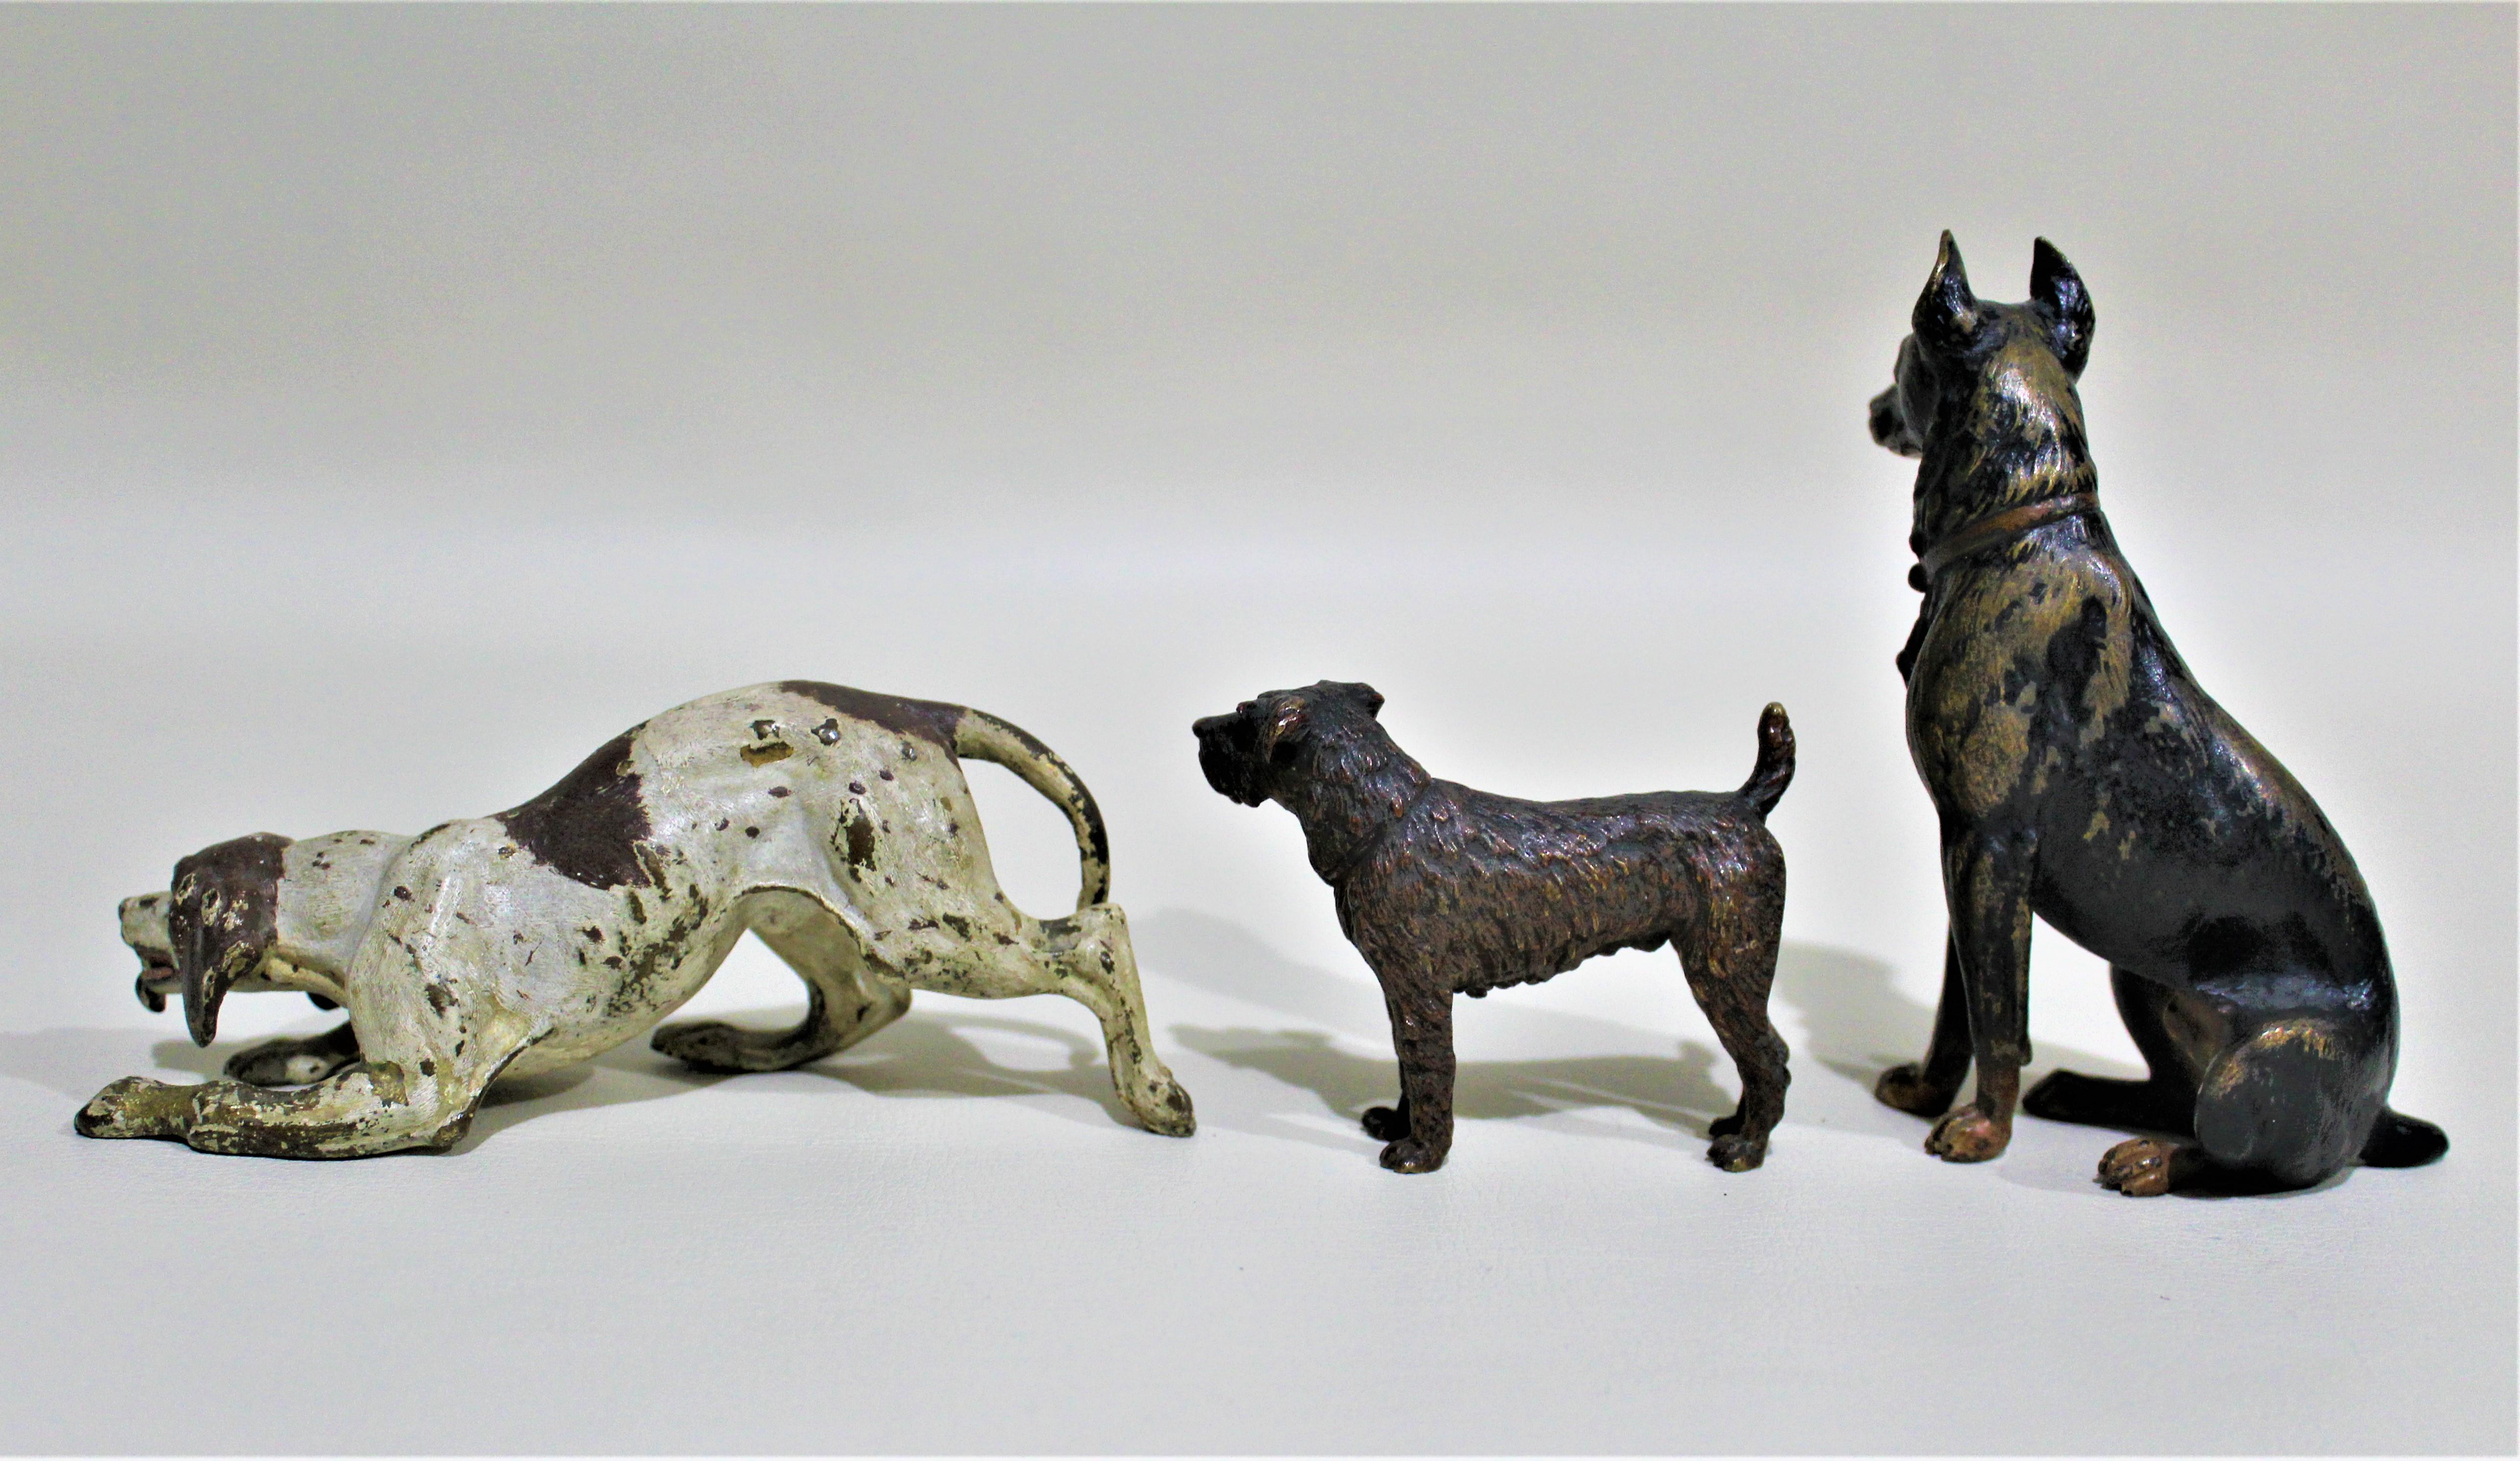 Antique Austrian miniature cast and cold painted bronze sculptures of three dogs presented in one lot, dating from the 1900s-1920s time period. Each figurine is ornately cast and painted in a realistic style.

Approximate dimensions of figures